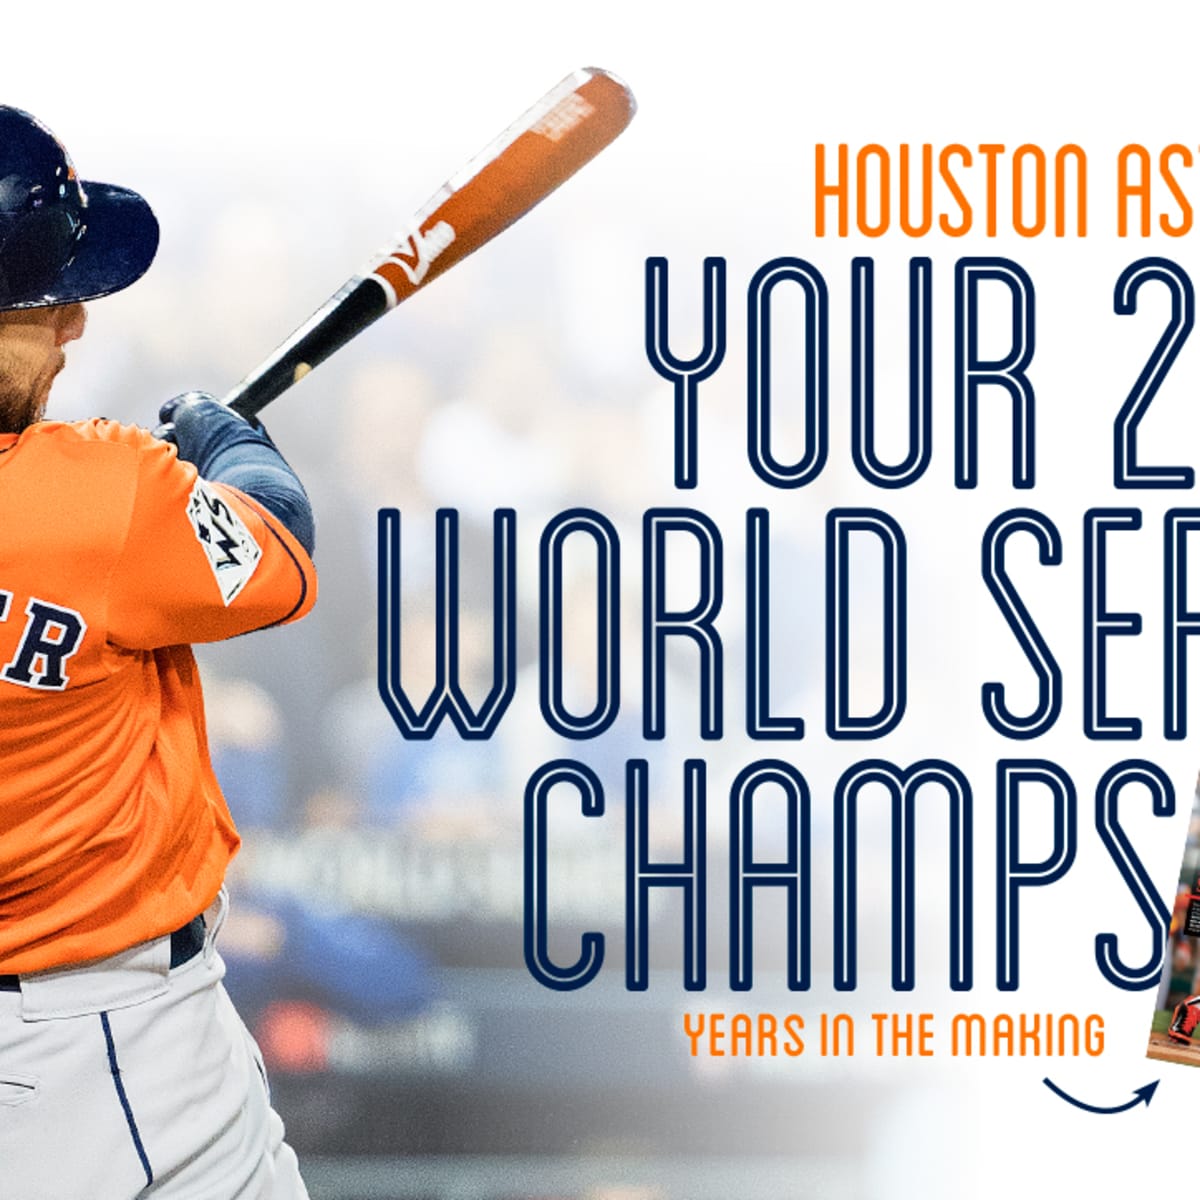 Astros Dodgers World Series: Houston plays for another championship 5 years  after earning historic first title - ABC13 Houston